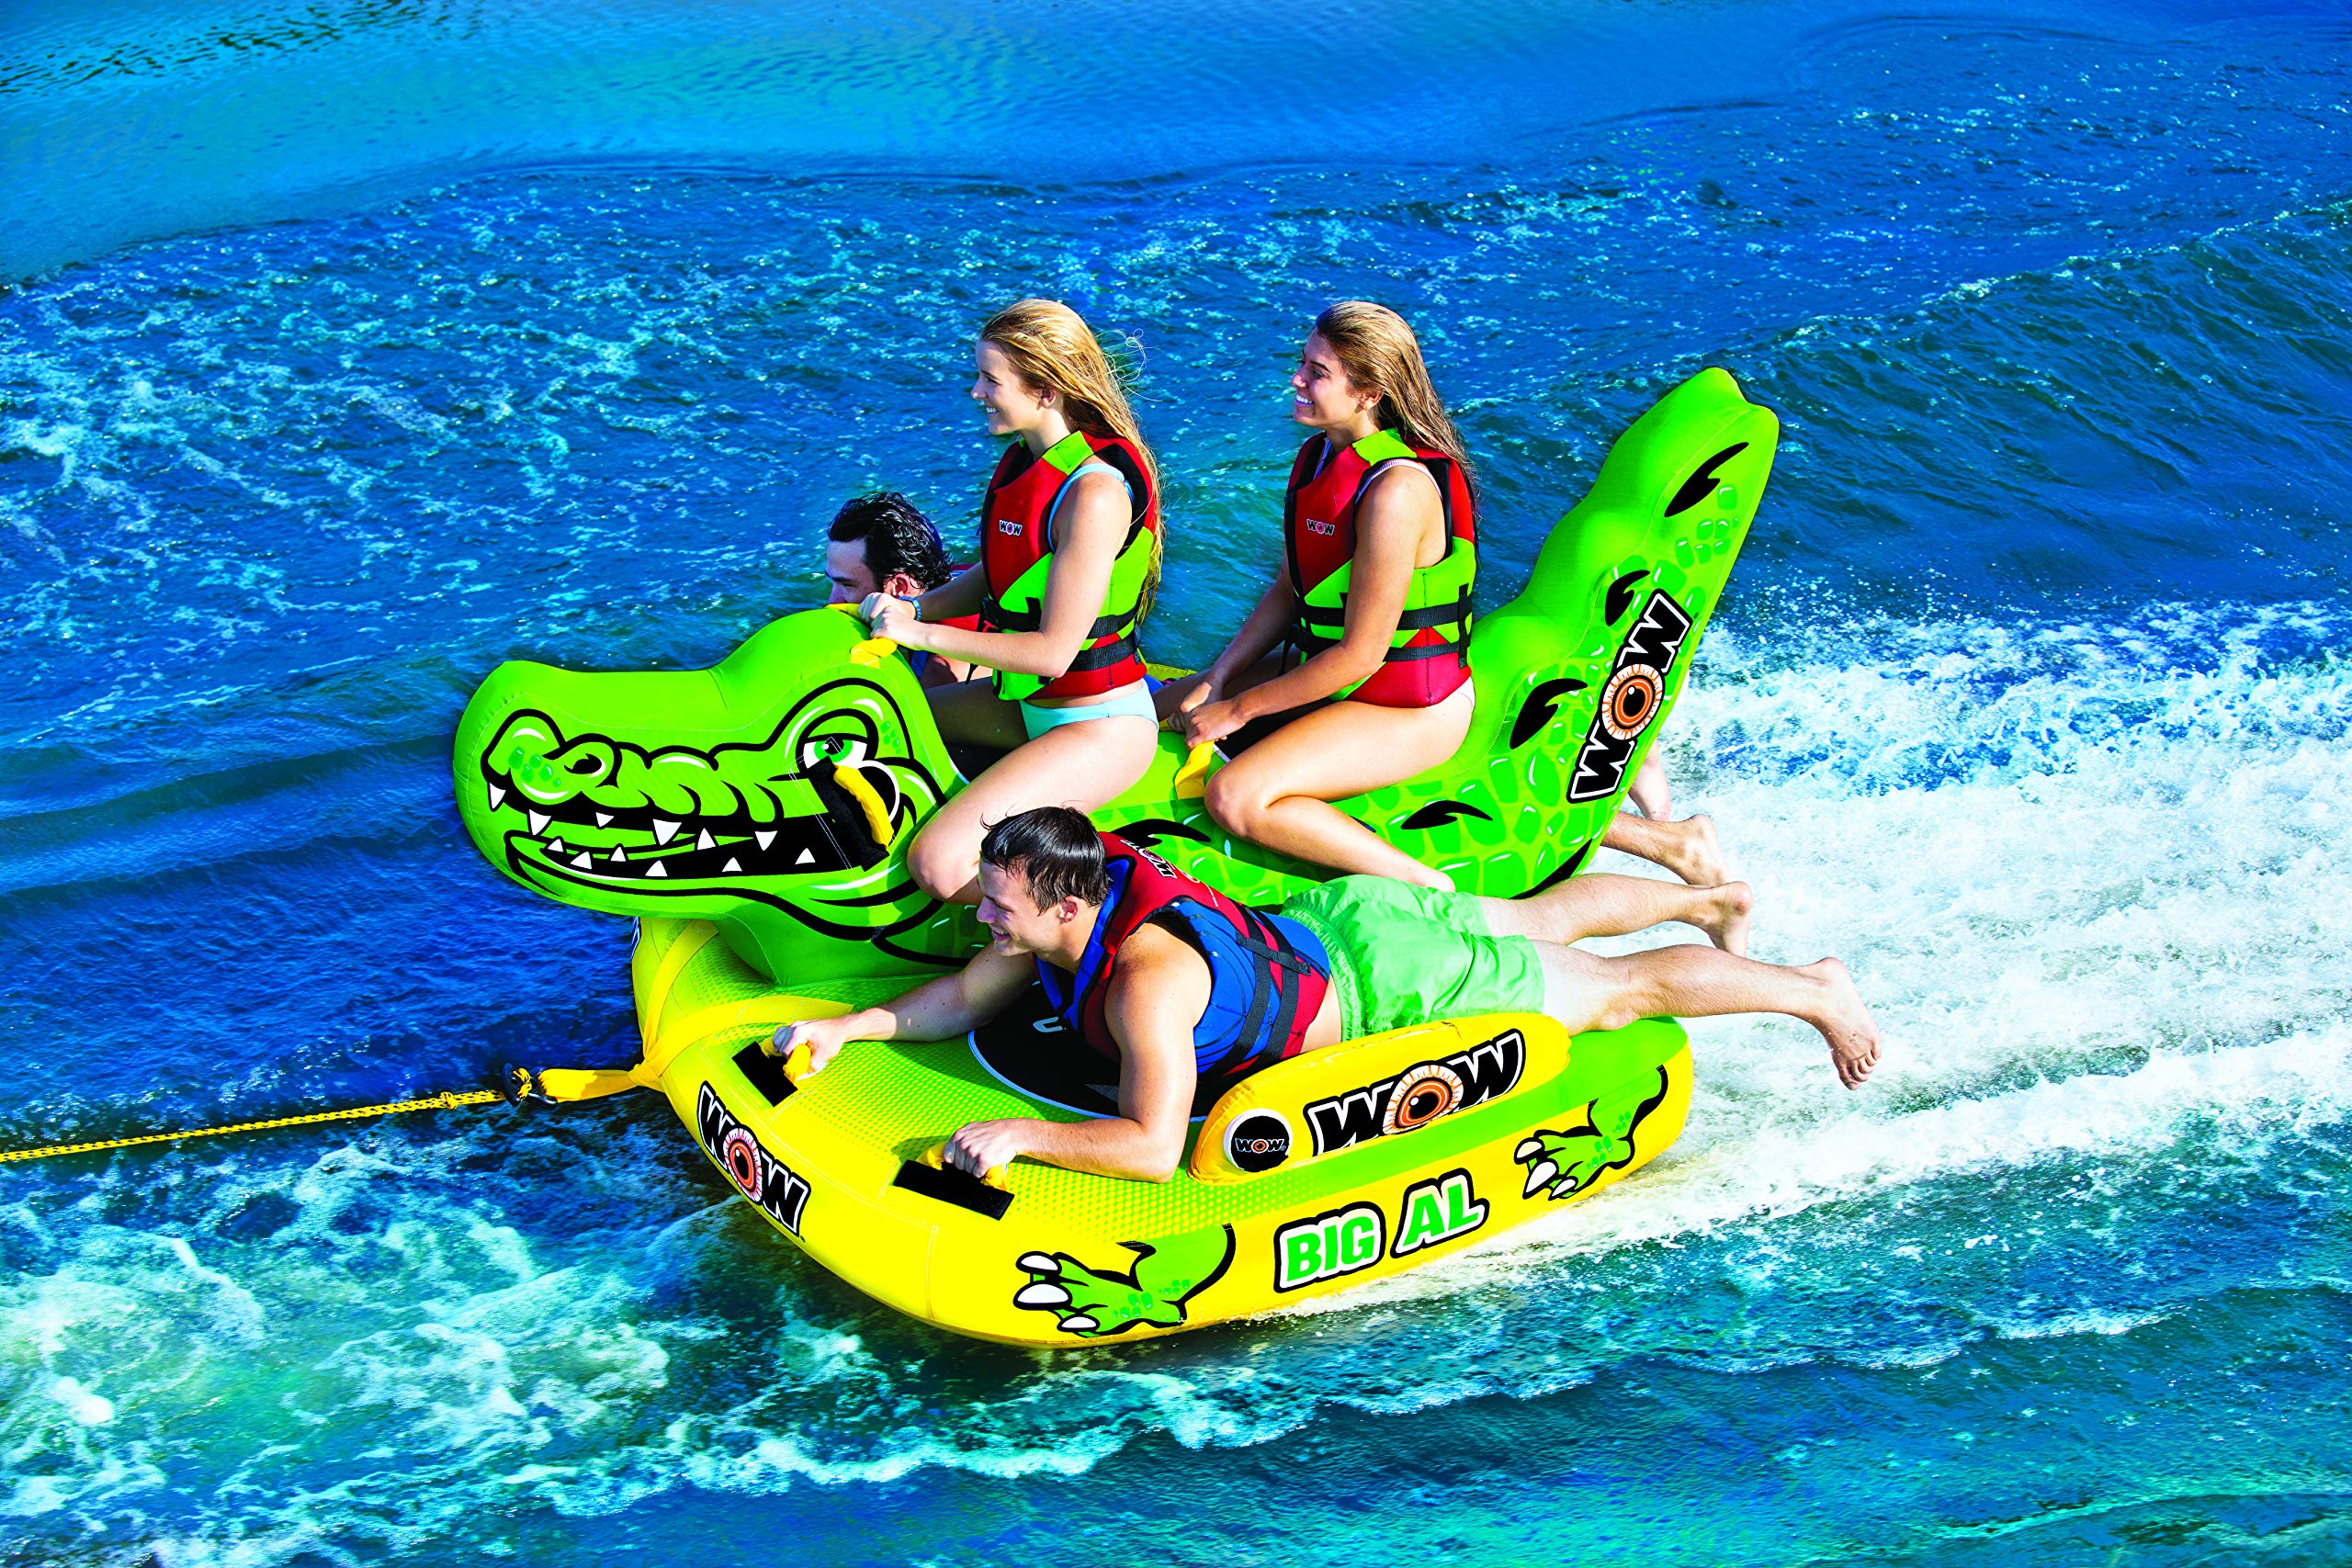 WOW World of Watersports Big Al Jr. 1 2 3 or 4 Person Inflatable Towable Tube for Boating, 19-1070